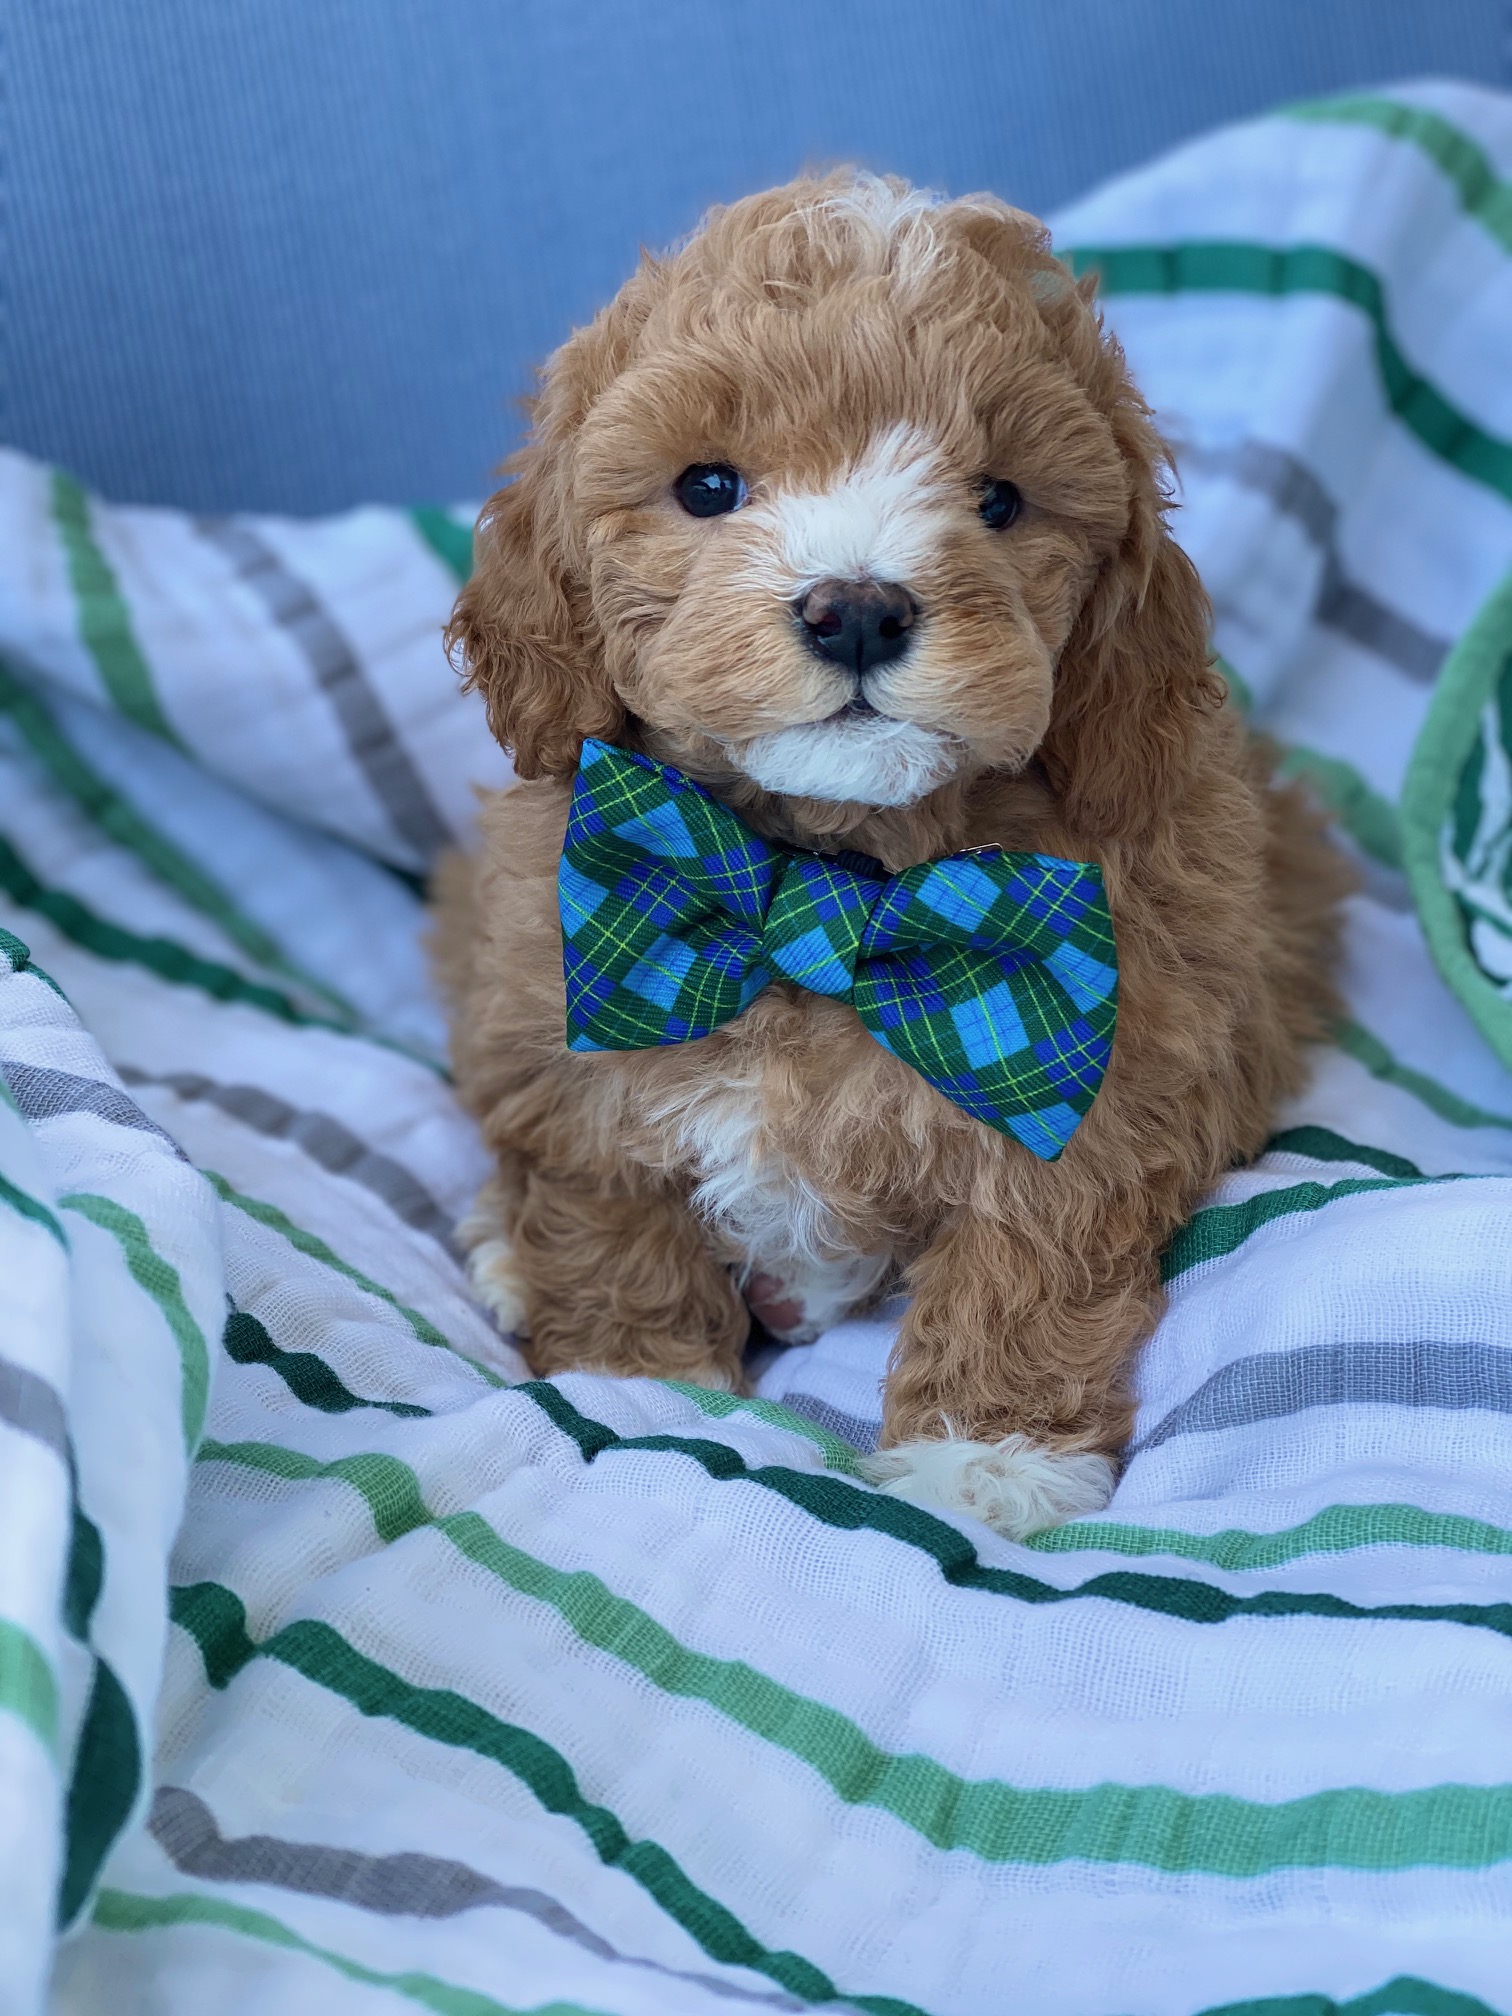 A small brown puppy with a neatly tied blue and green plaid bow tie around its neck.